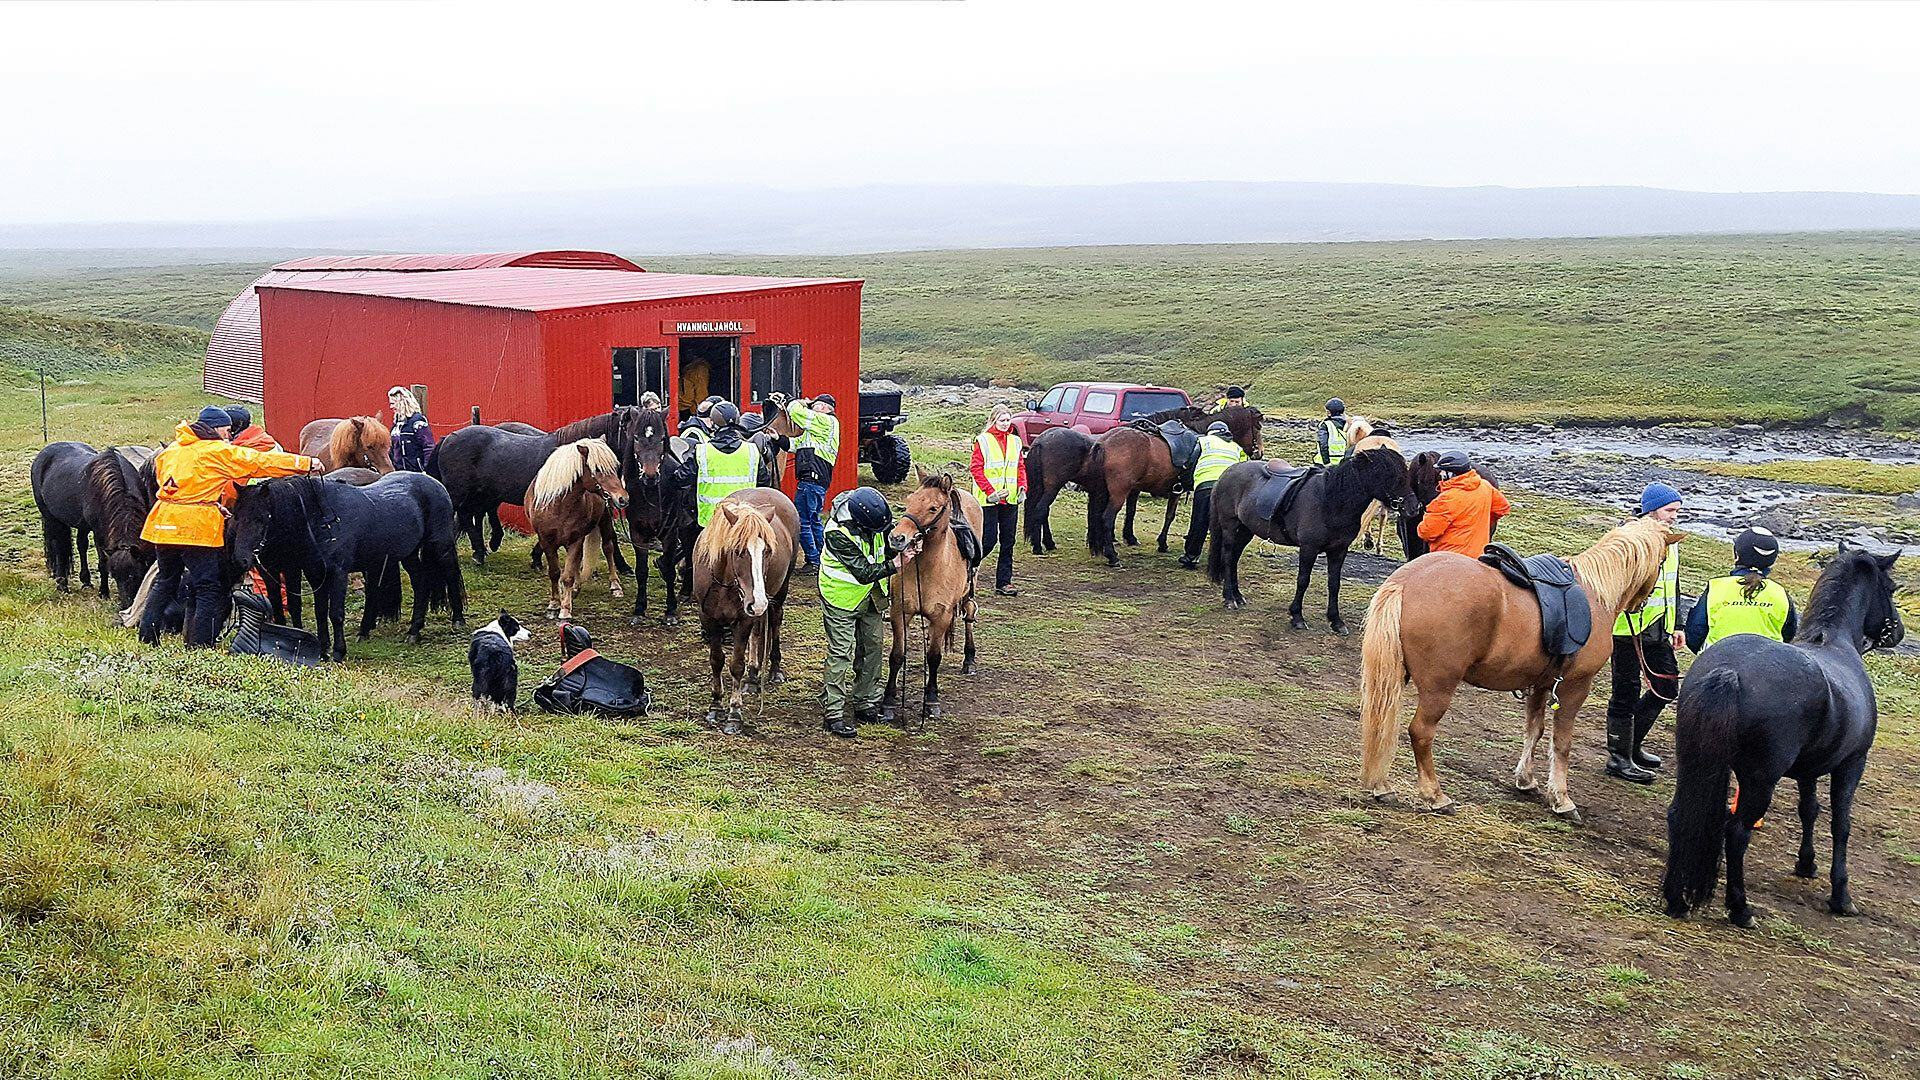 A group of people and horses gathered outside a red building in a grassy rural setting